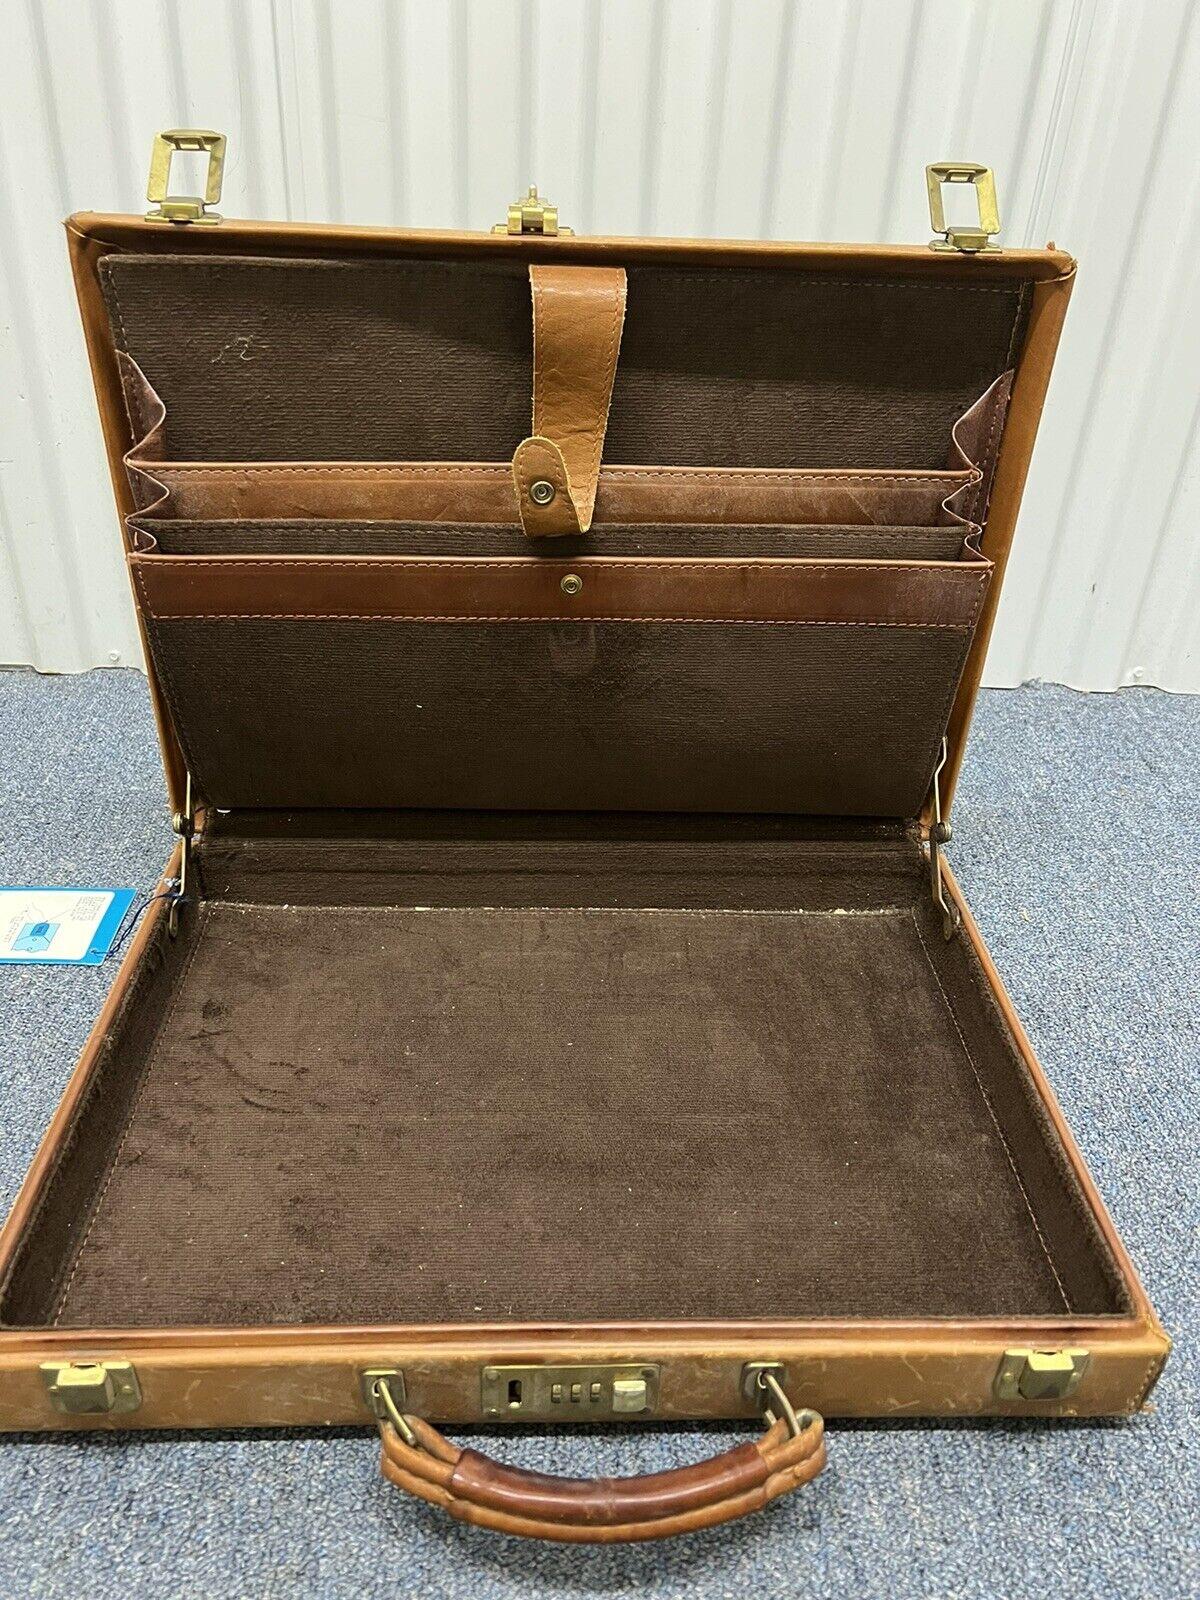 Vintage New York YANKEES Gilt Embossed Leather Briefcase In Good Condition For Sale In Atlanta, GA